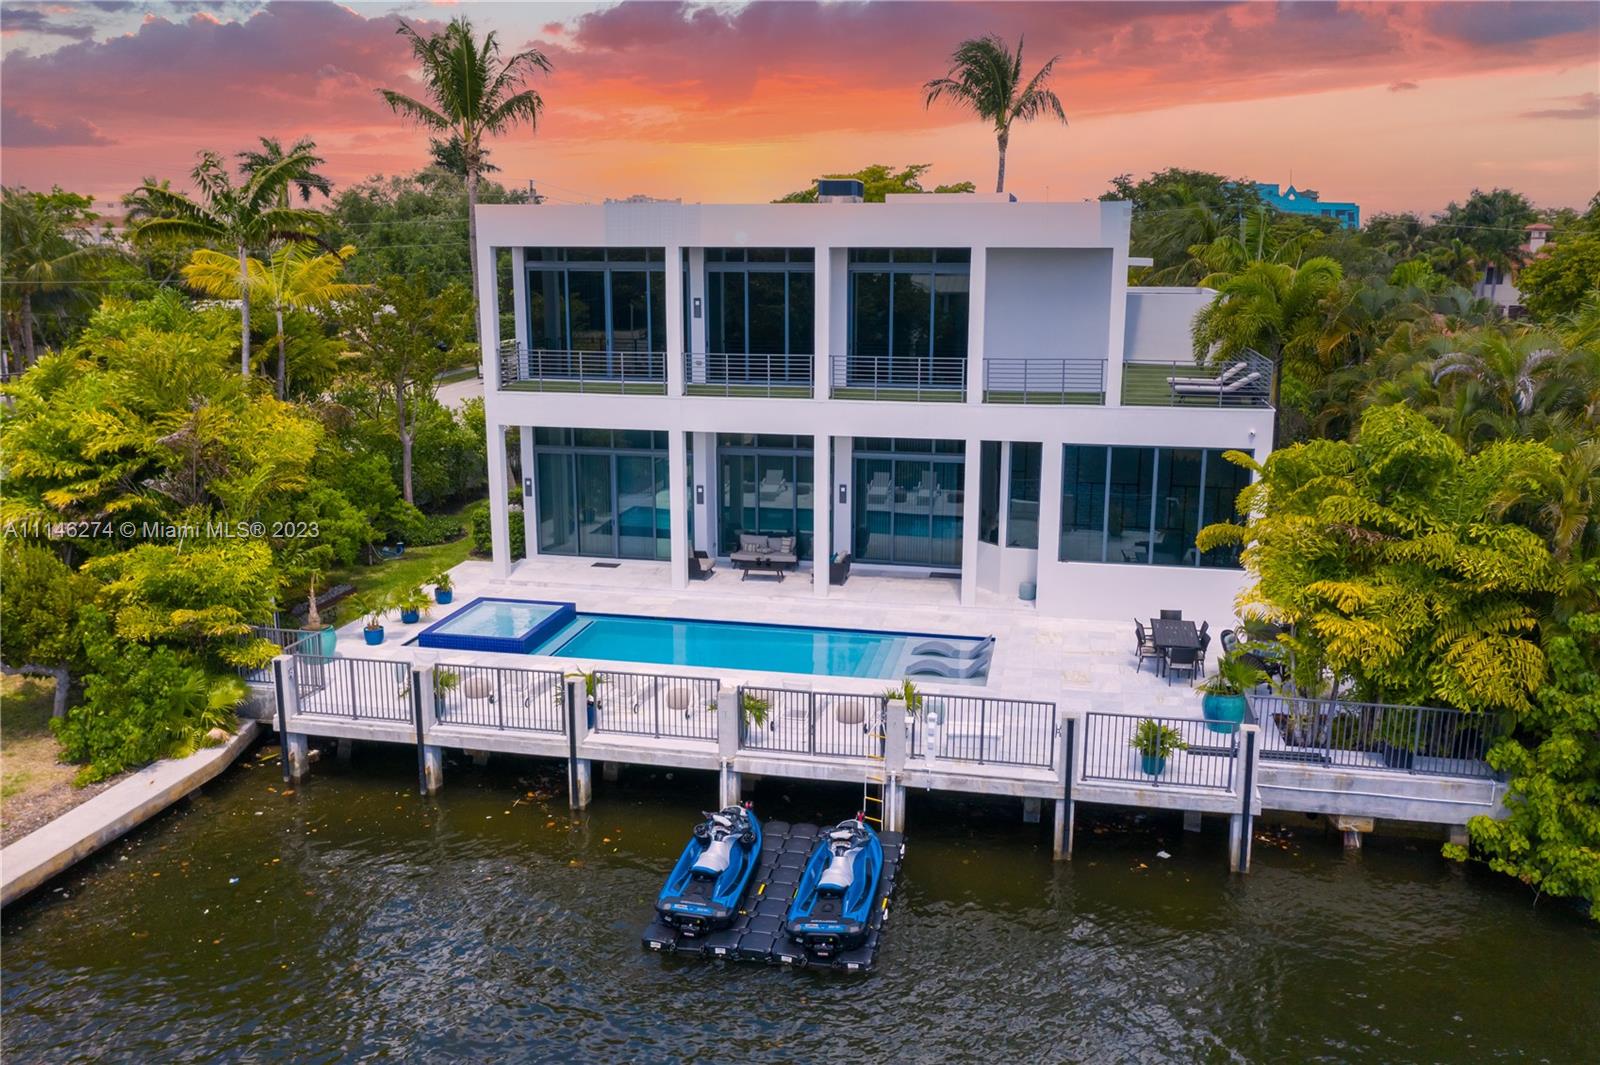 This unique and impeccably designed home is sure to leave you in awe. Enter this vast open-floor plan and step out to 100ft of yacht friendly frontage and oasis. Gourmet kitchen, generous master-suite & master-bath, with amazing intracoastal views. Just minutes to fine dining, shopping and the beach. This home rents for 100k+ monthly, and comes fully equipped with a vacation rental license. Call agent for exclusive showings.